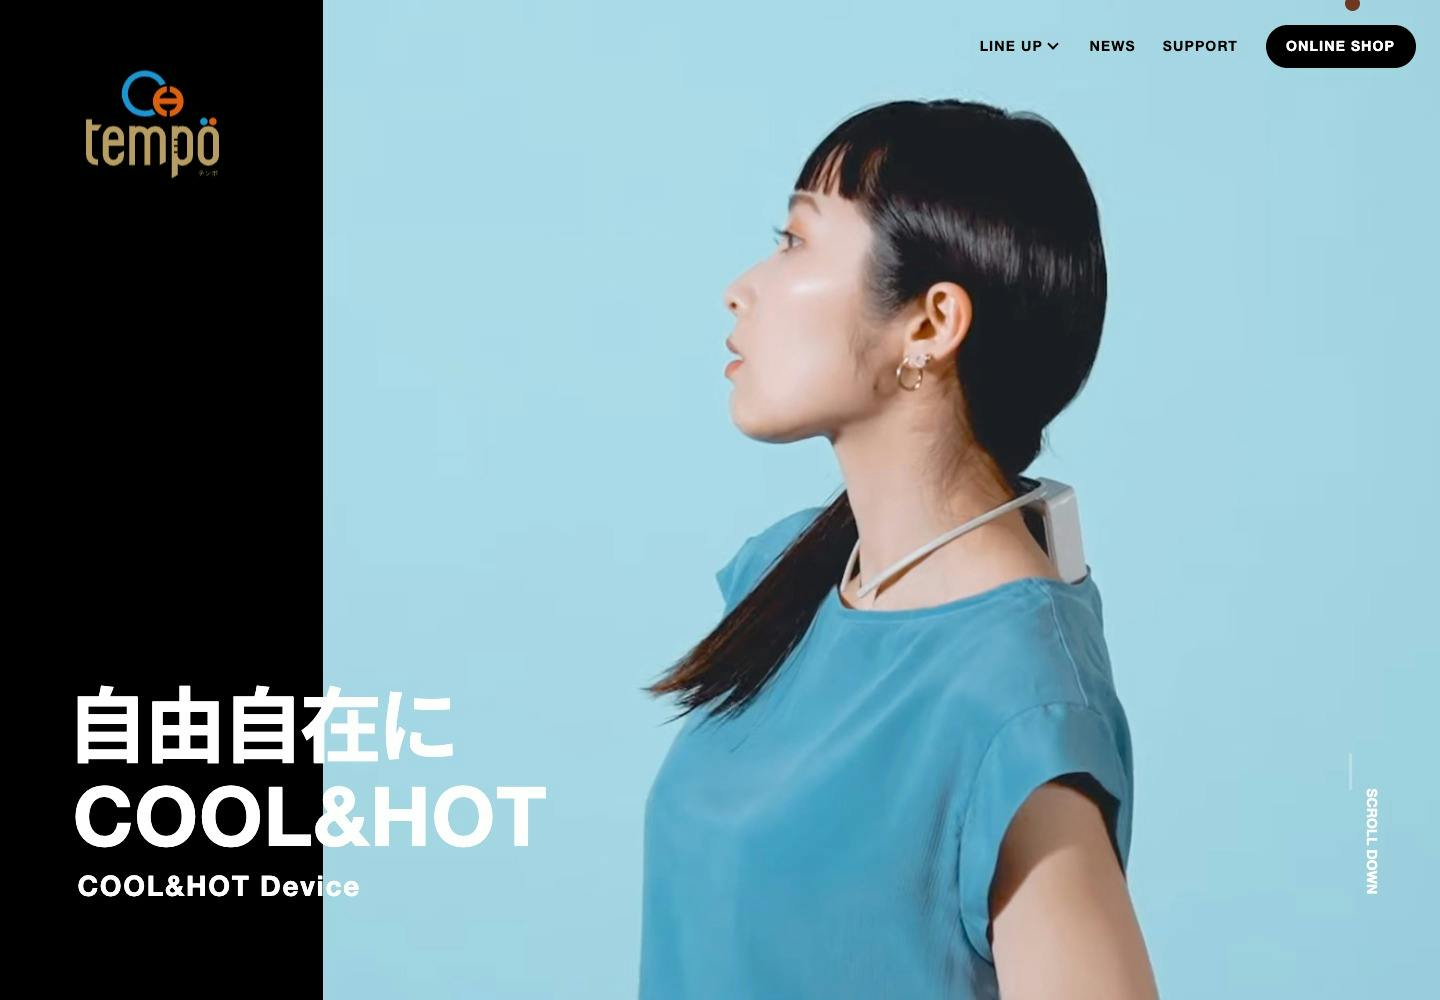 Cover Image for Tempo（テンポ）｜自由自在にCOOL&HOT｜ペルチェ素子デバイス